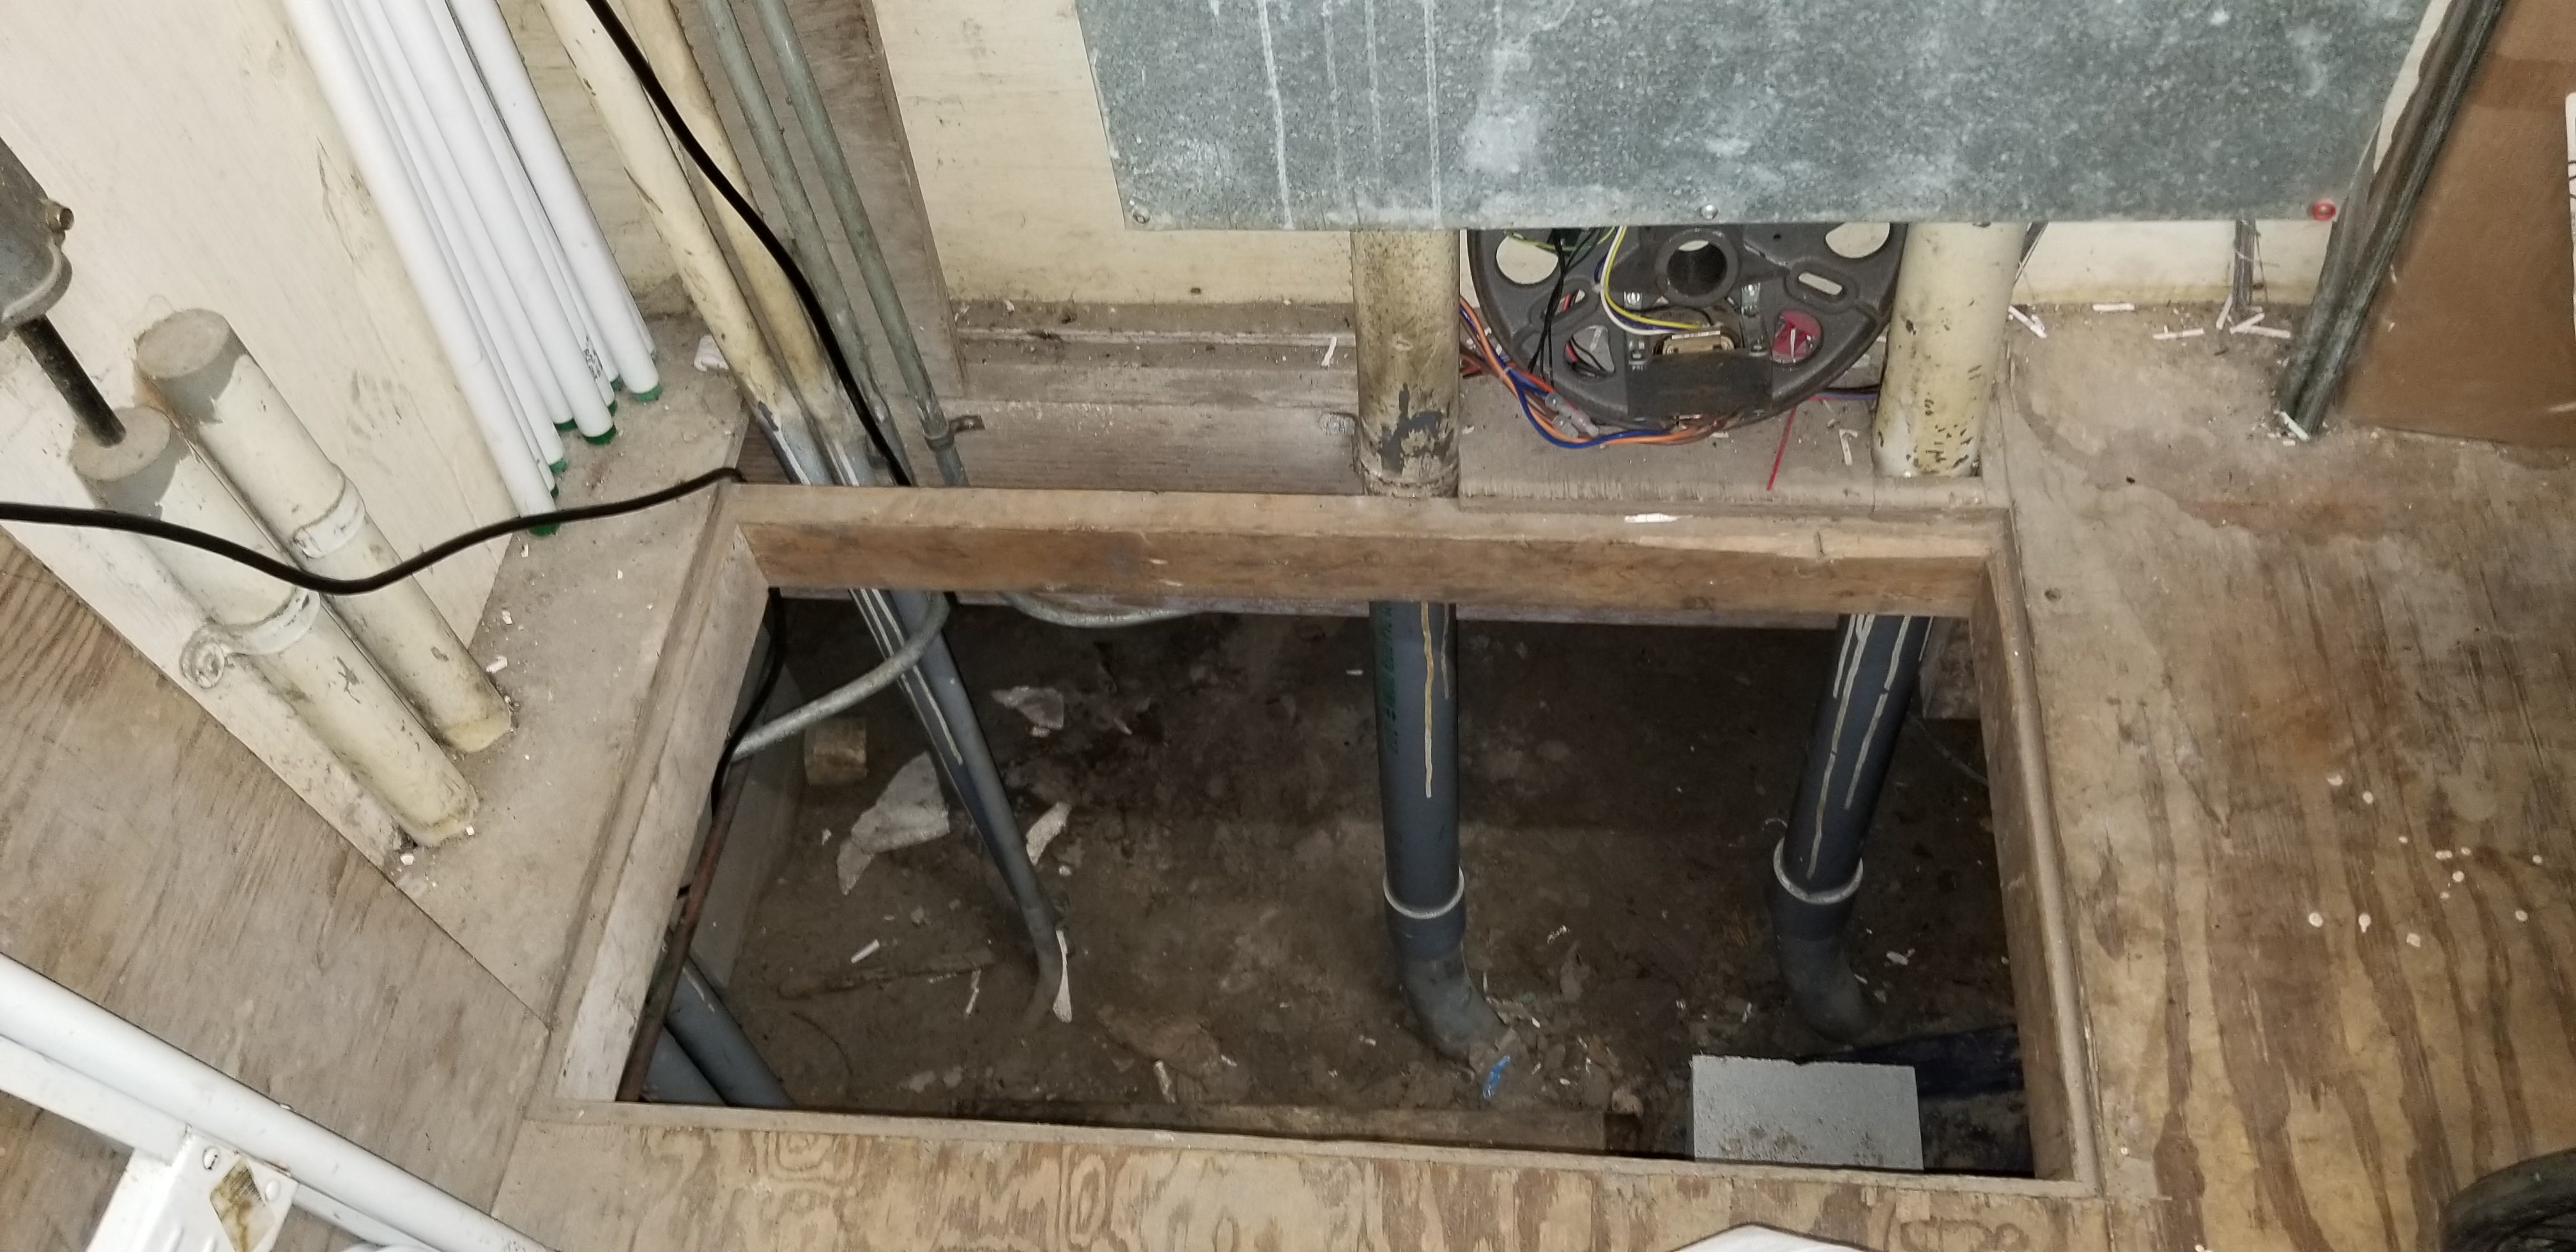 Sometimes you need to check your crawlspace during renovation.